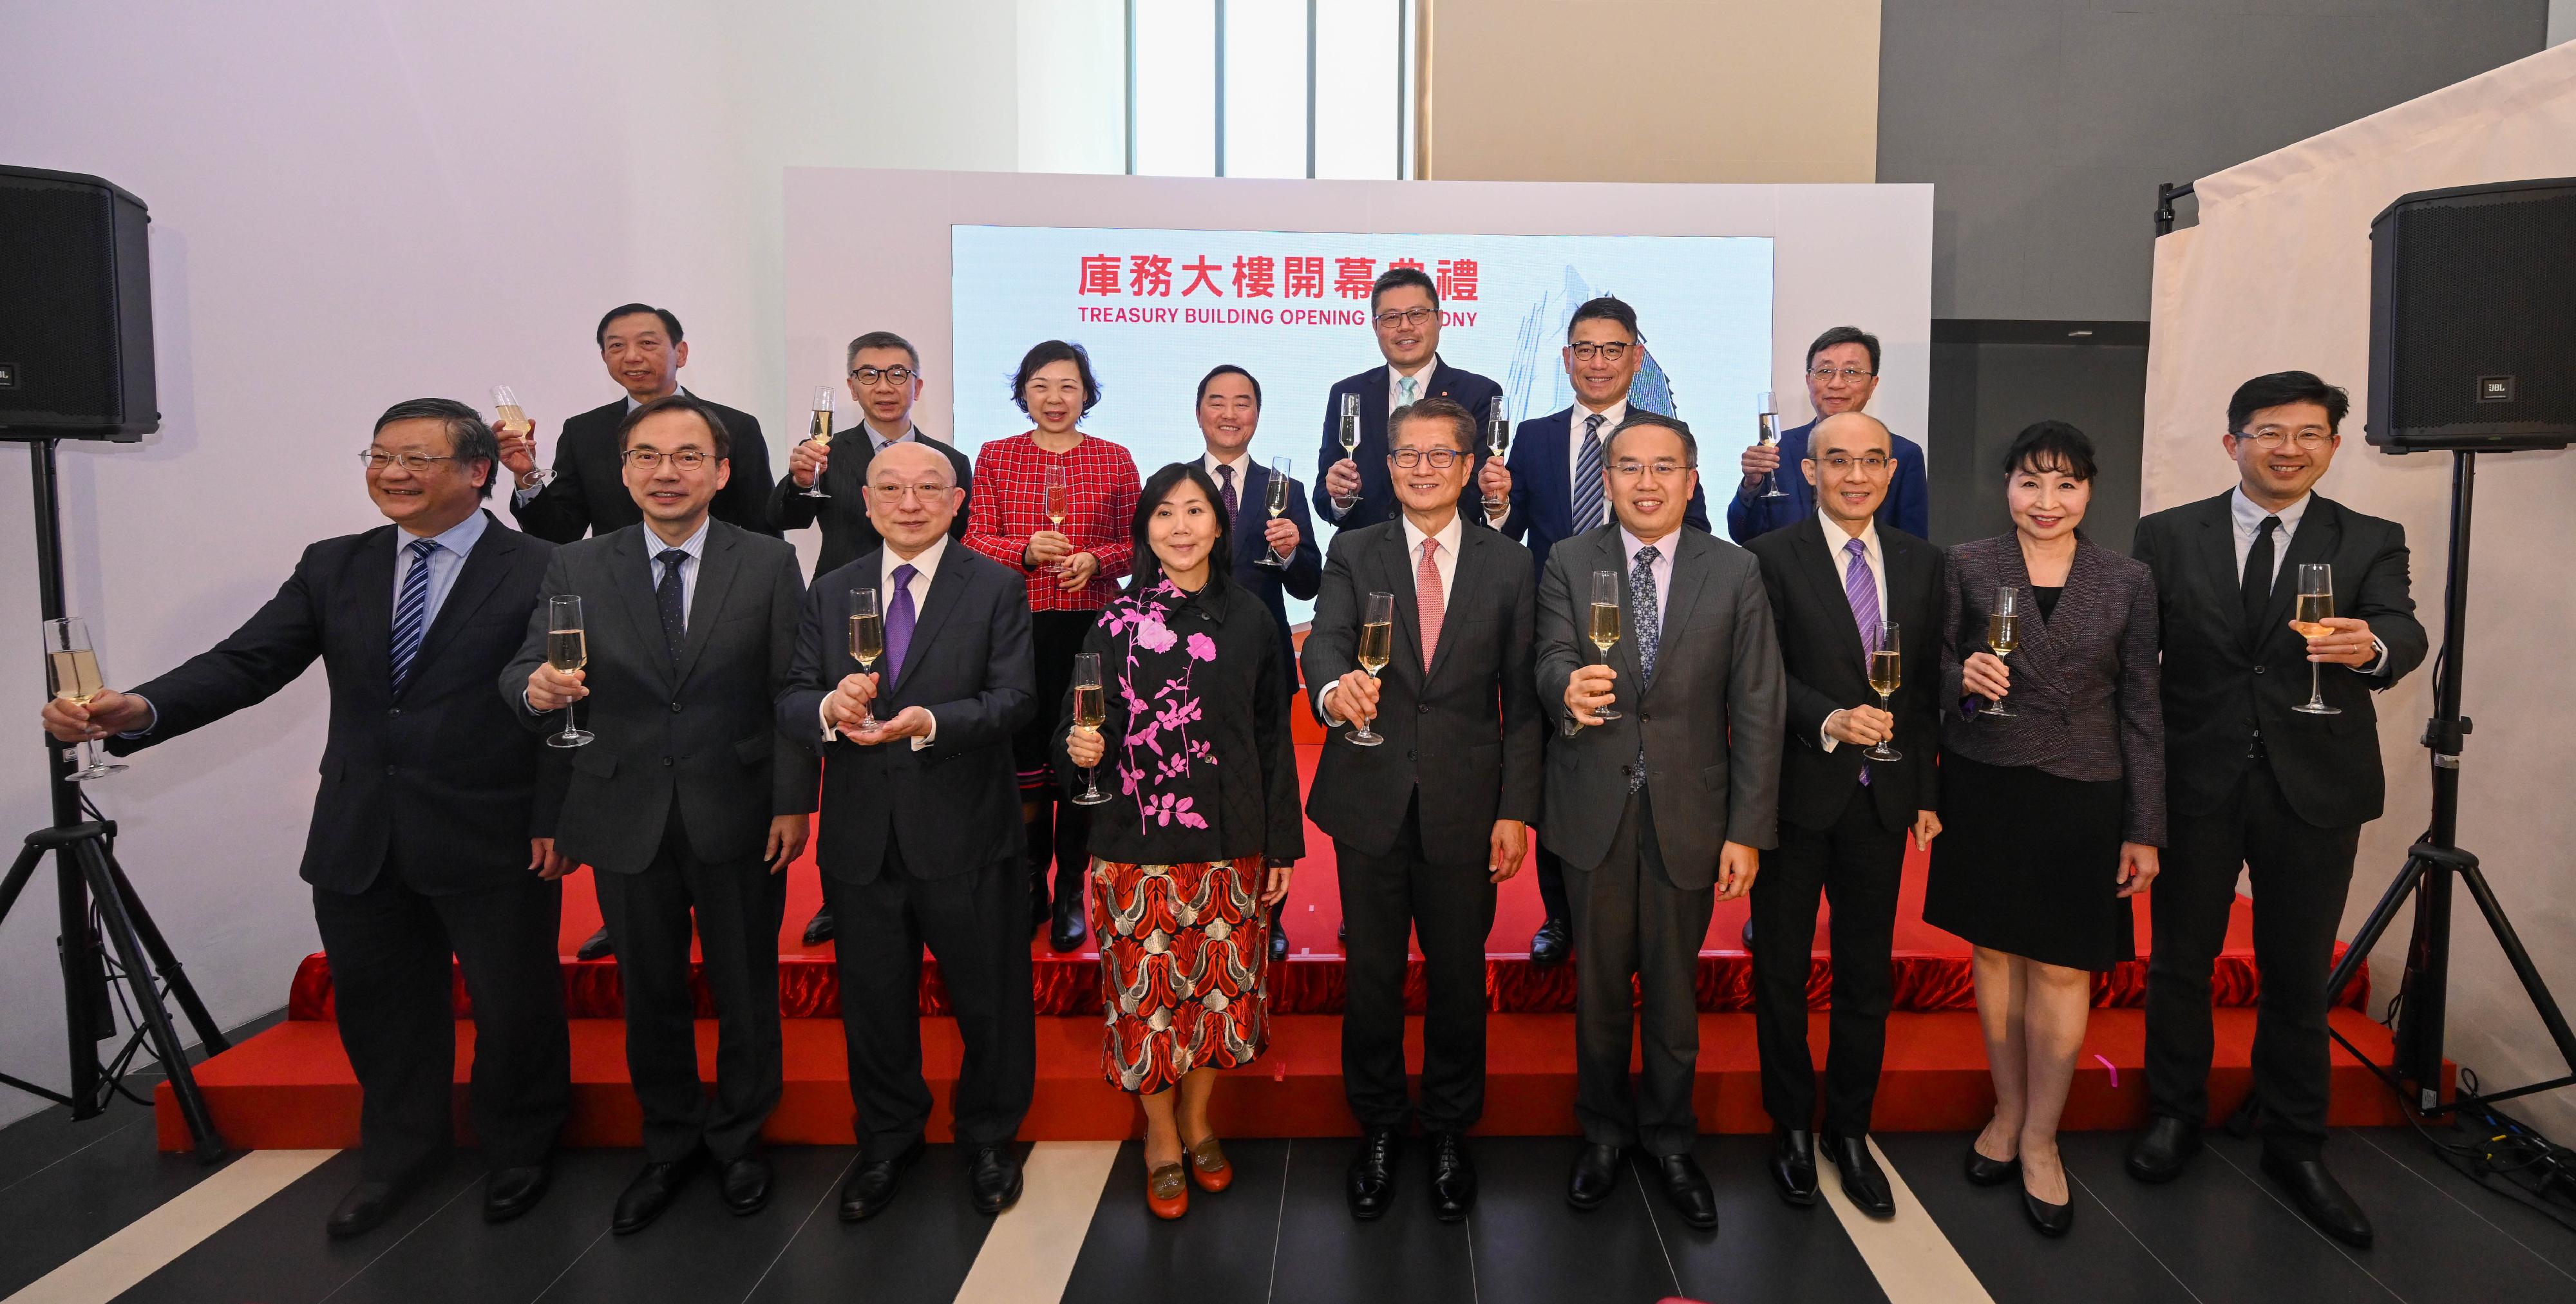 The opening ceremony of the Treasury Building was held today (March 12). Photo shows the Financial Secretary, Mr Paul Chan (front row, centre); the Secretary for Financial Services and the Treasury, Mr Christopher Hui (front row, fourth right); the Permanent Secretary for Financial Services and the Treasury (Treasury), Miss Cathy Chu (front row, fourth left); the Director of Accounting Services, Ms Susanna Cheung (front row, second right); the Government Property Administrator, Mr Eugene Fung (front row, third left), and other guests proposing a toast.
